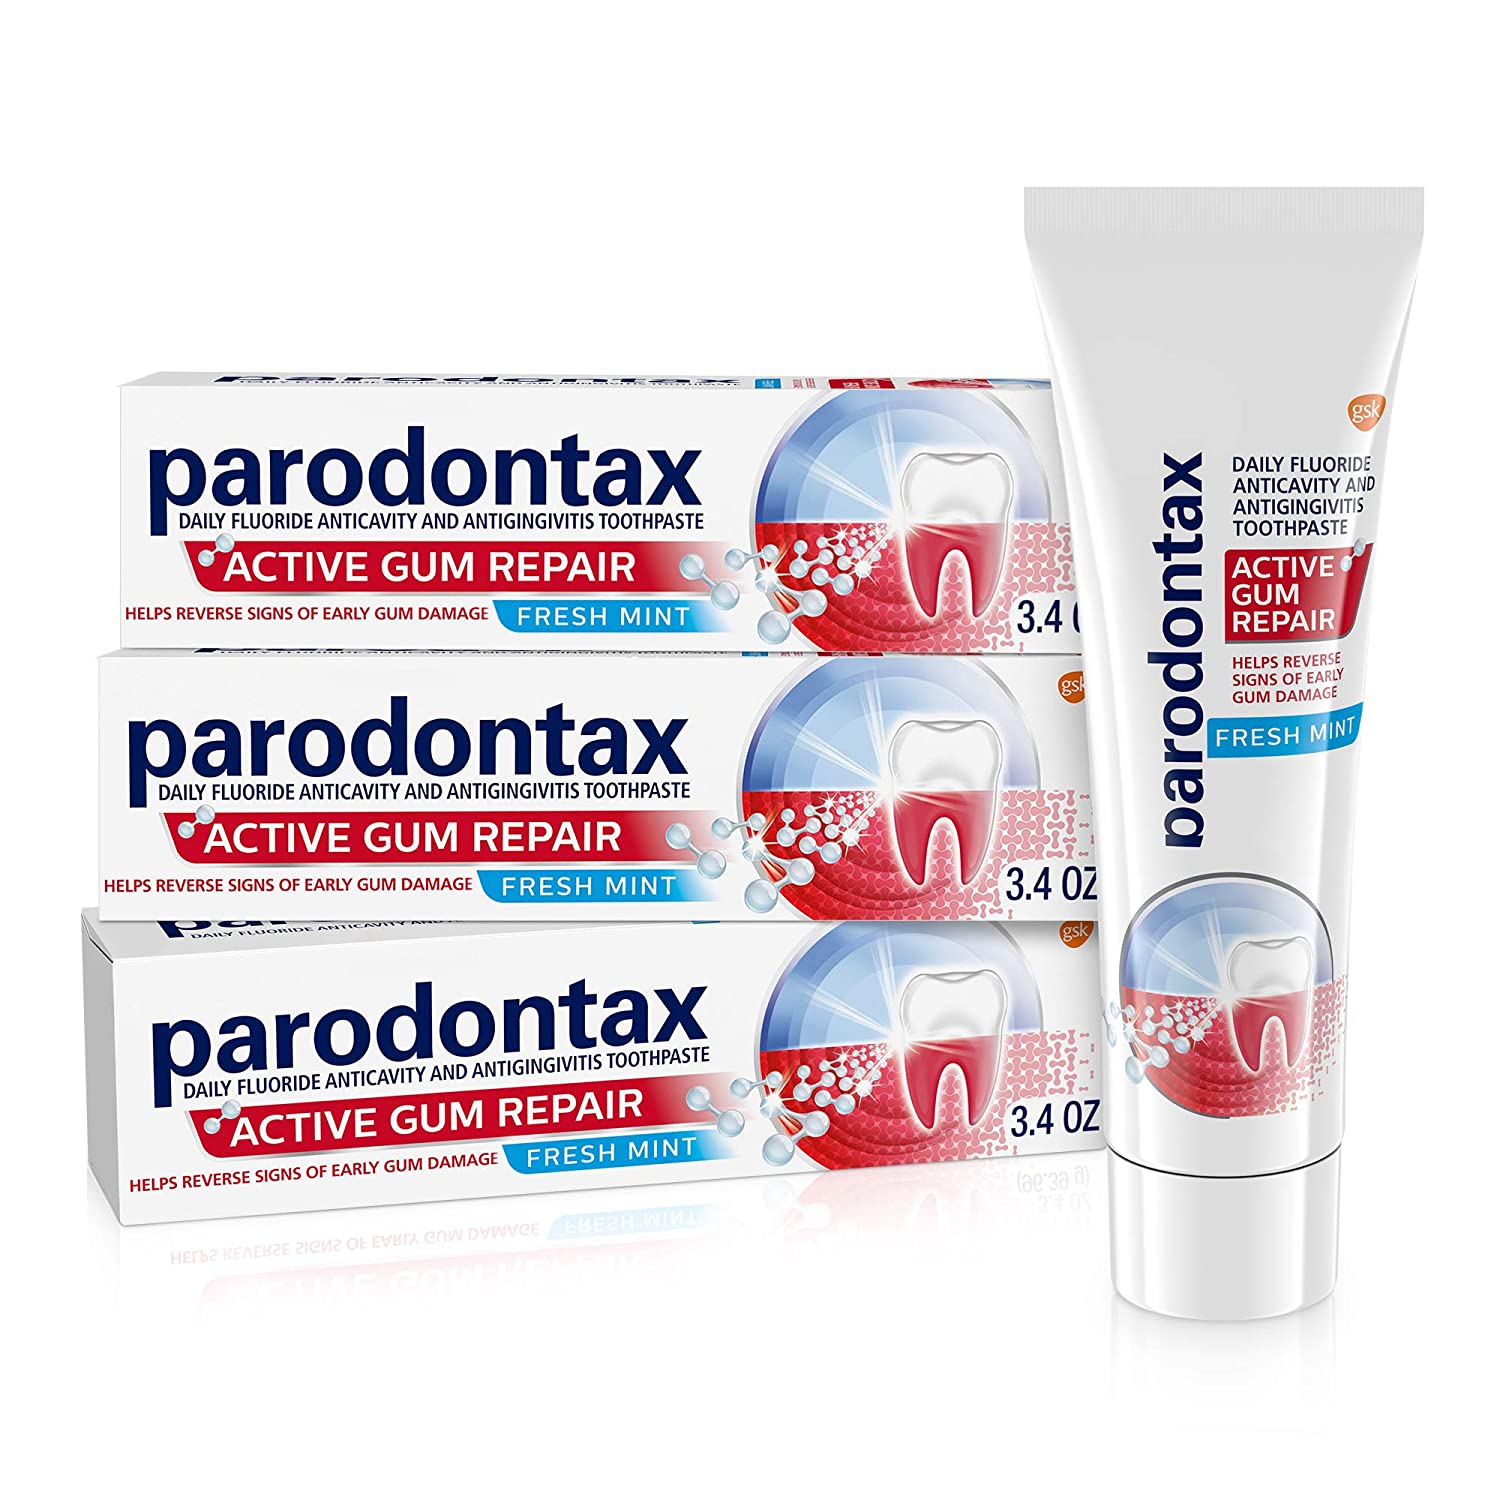 3-Pack 3.4-Oz Parodontax Active Gum Repair Toothpaste (Fresh Mint) $12.25 ($4.08 each) w/ S&S + Free Shipping w/ Prime or on $25+